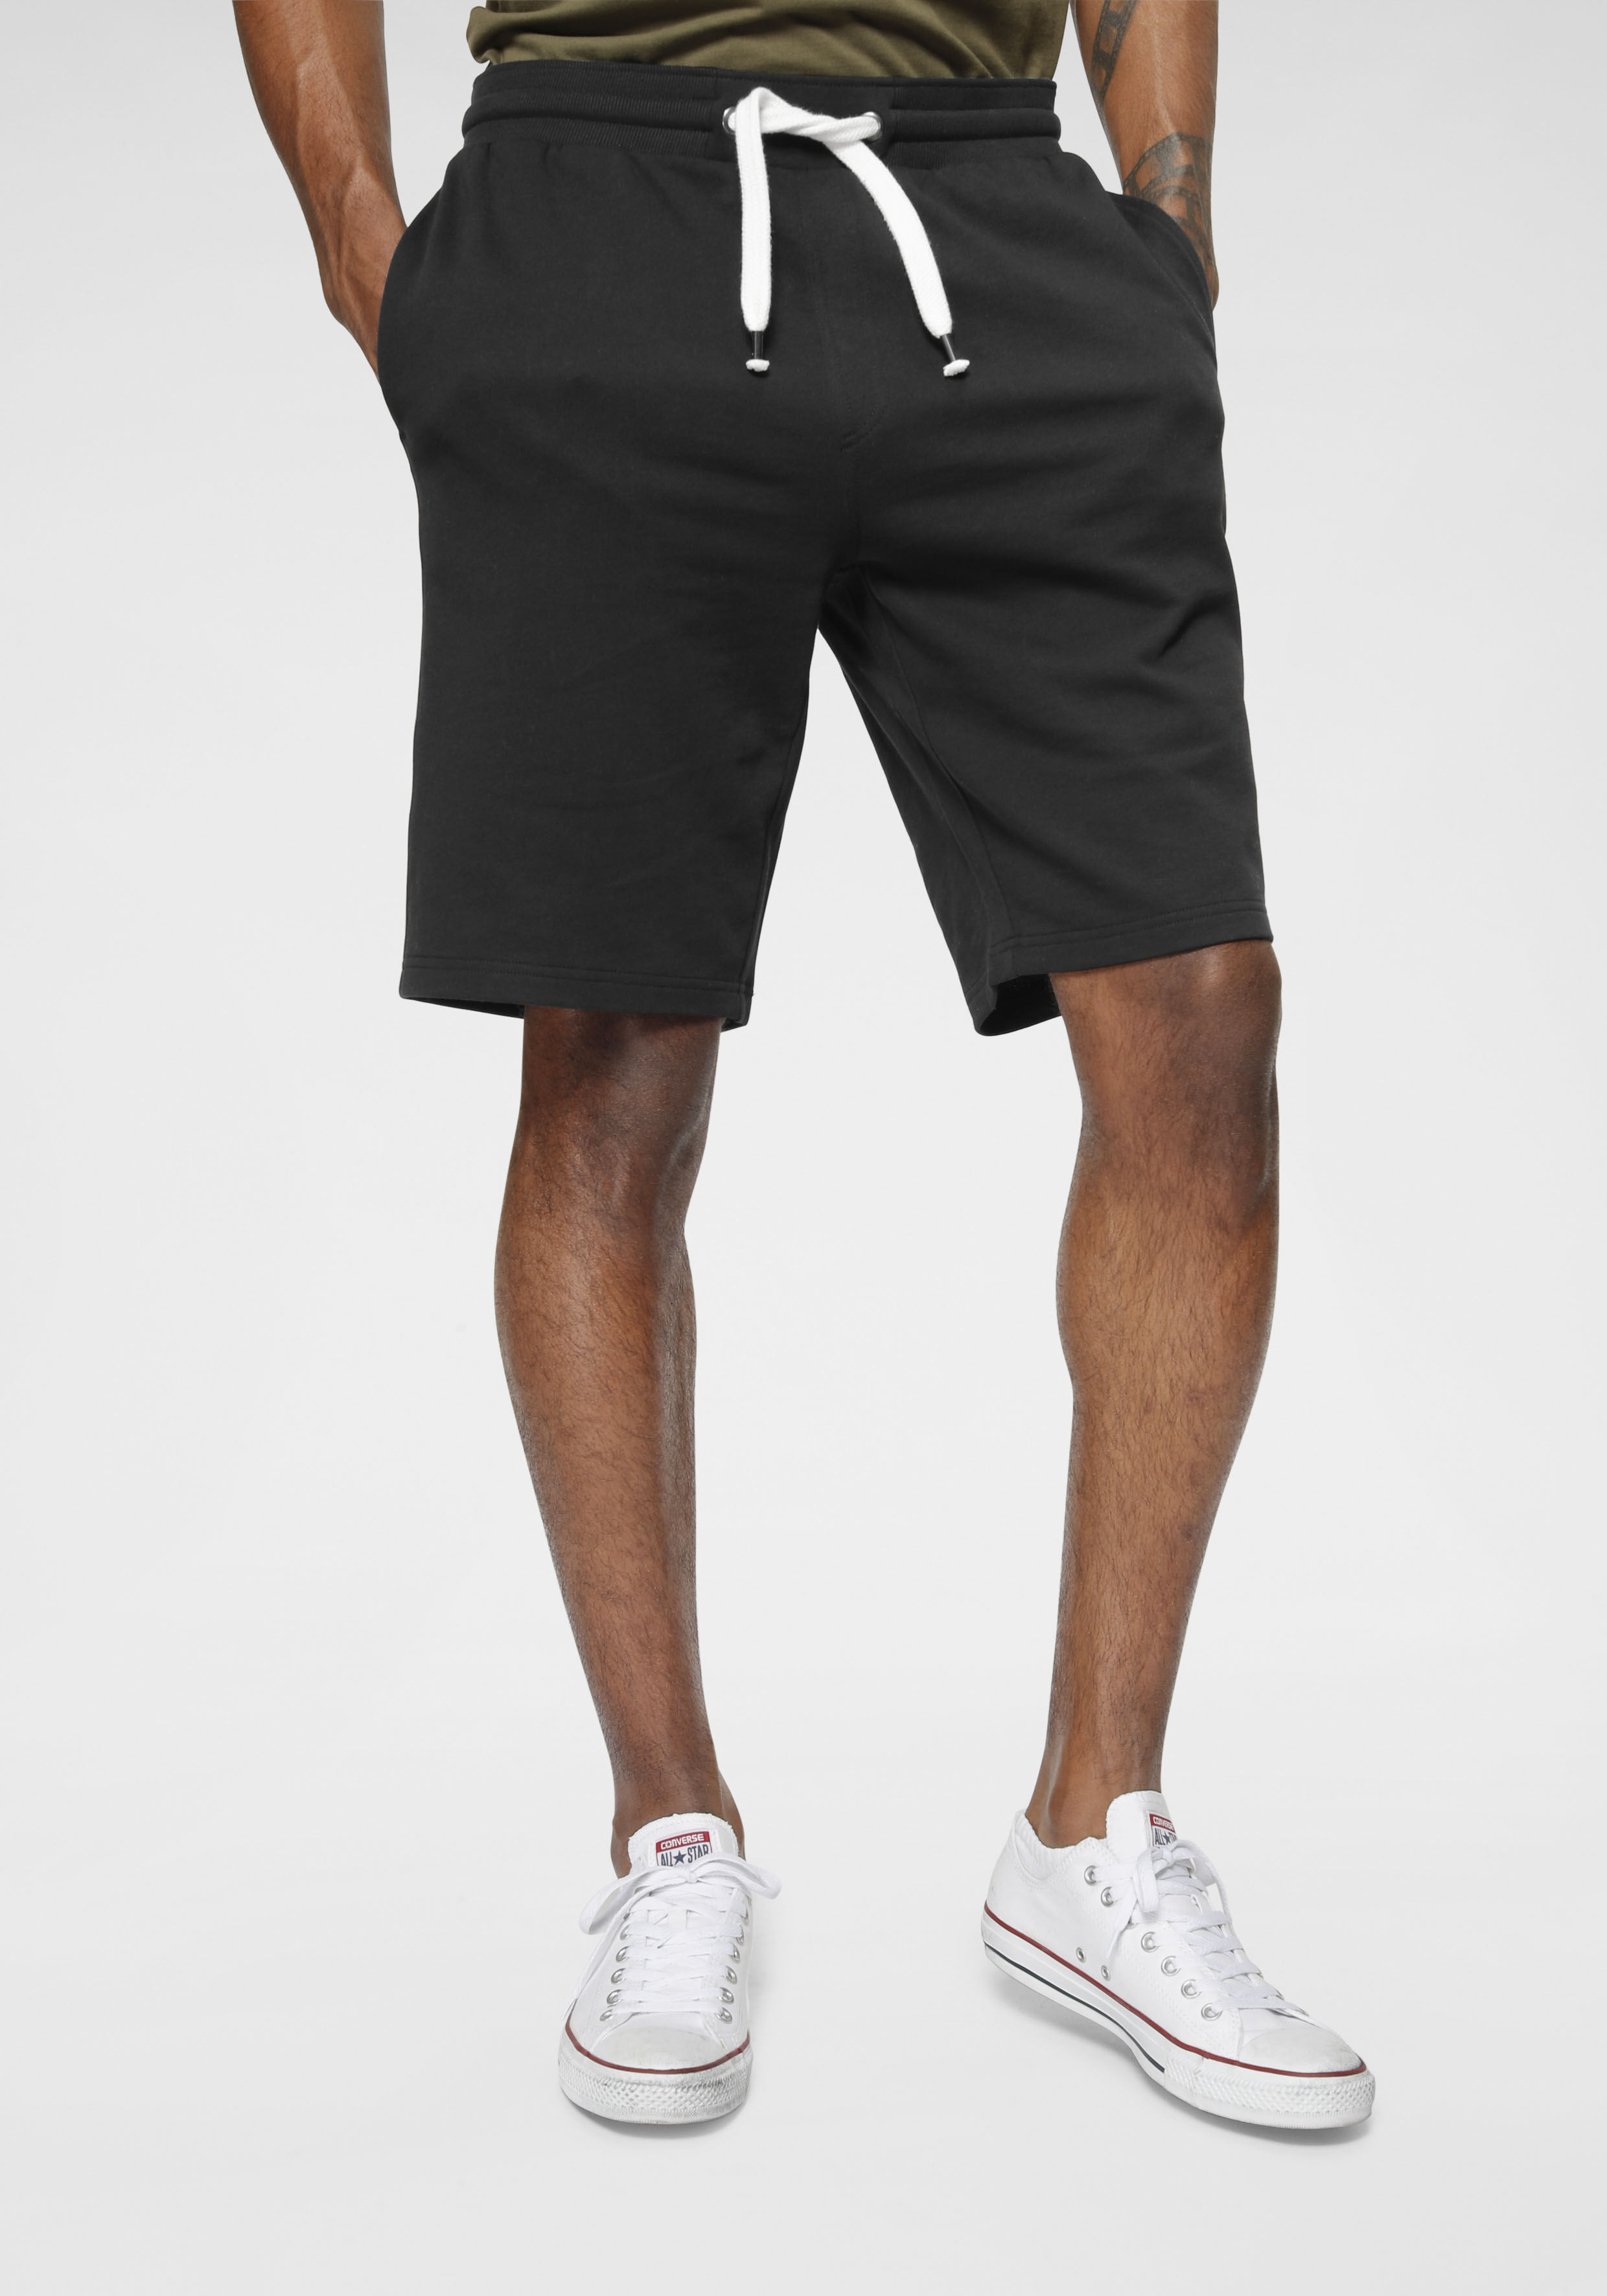 Athleisure Sweat Shorts - Relax Fit